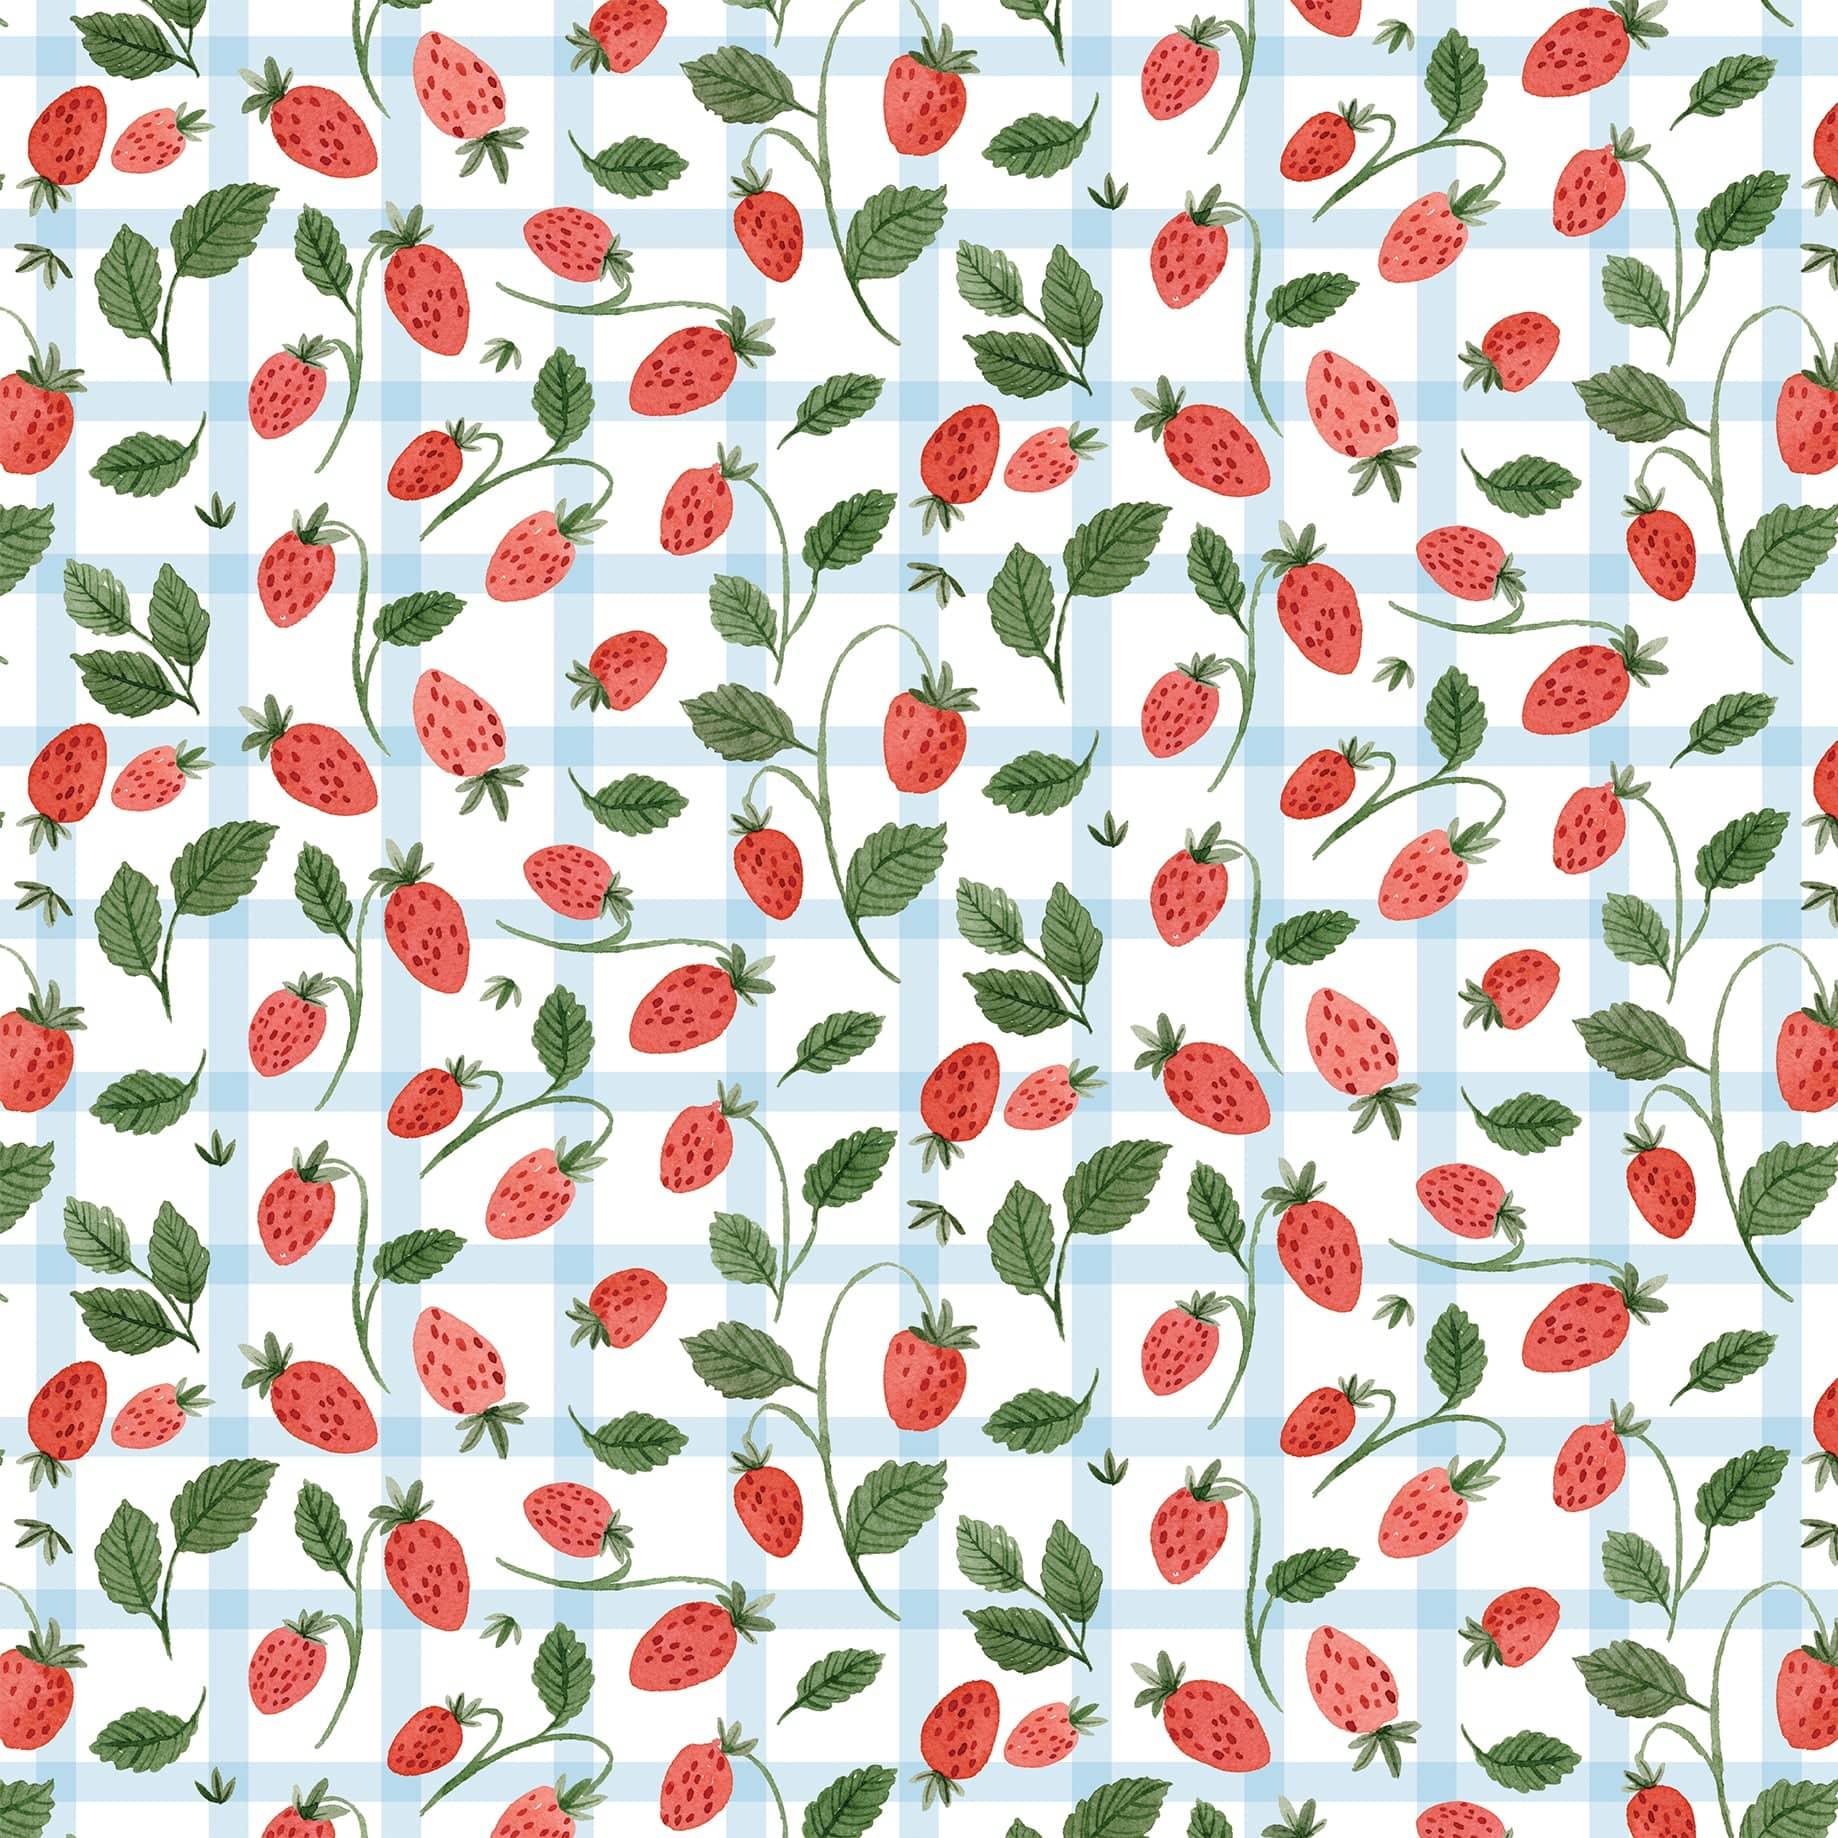 Summer Collection Summer Strawberries 12 x 12 Double-Sided Scrapbook Paper by Carta Bella - Scrapbook Supply Companies